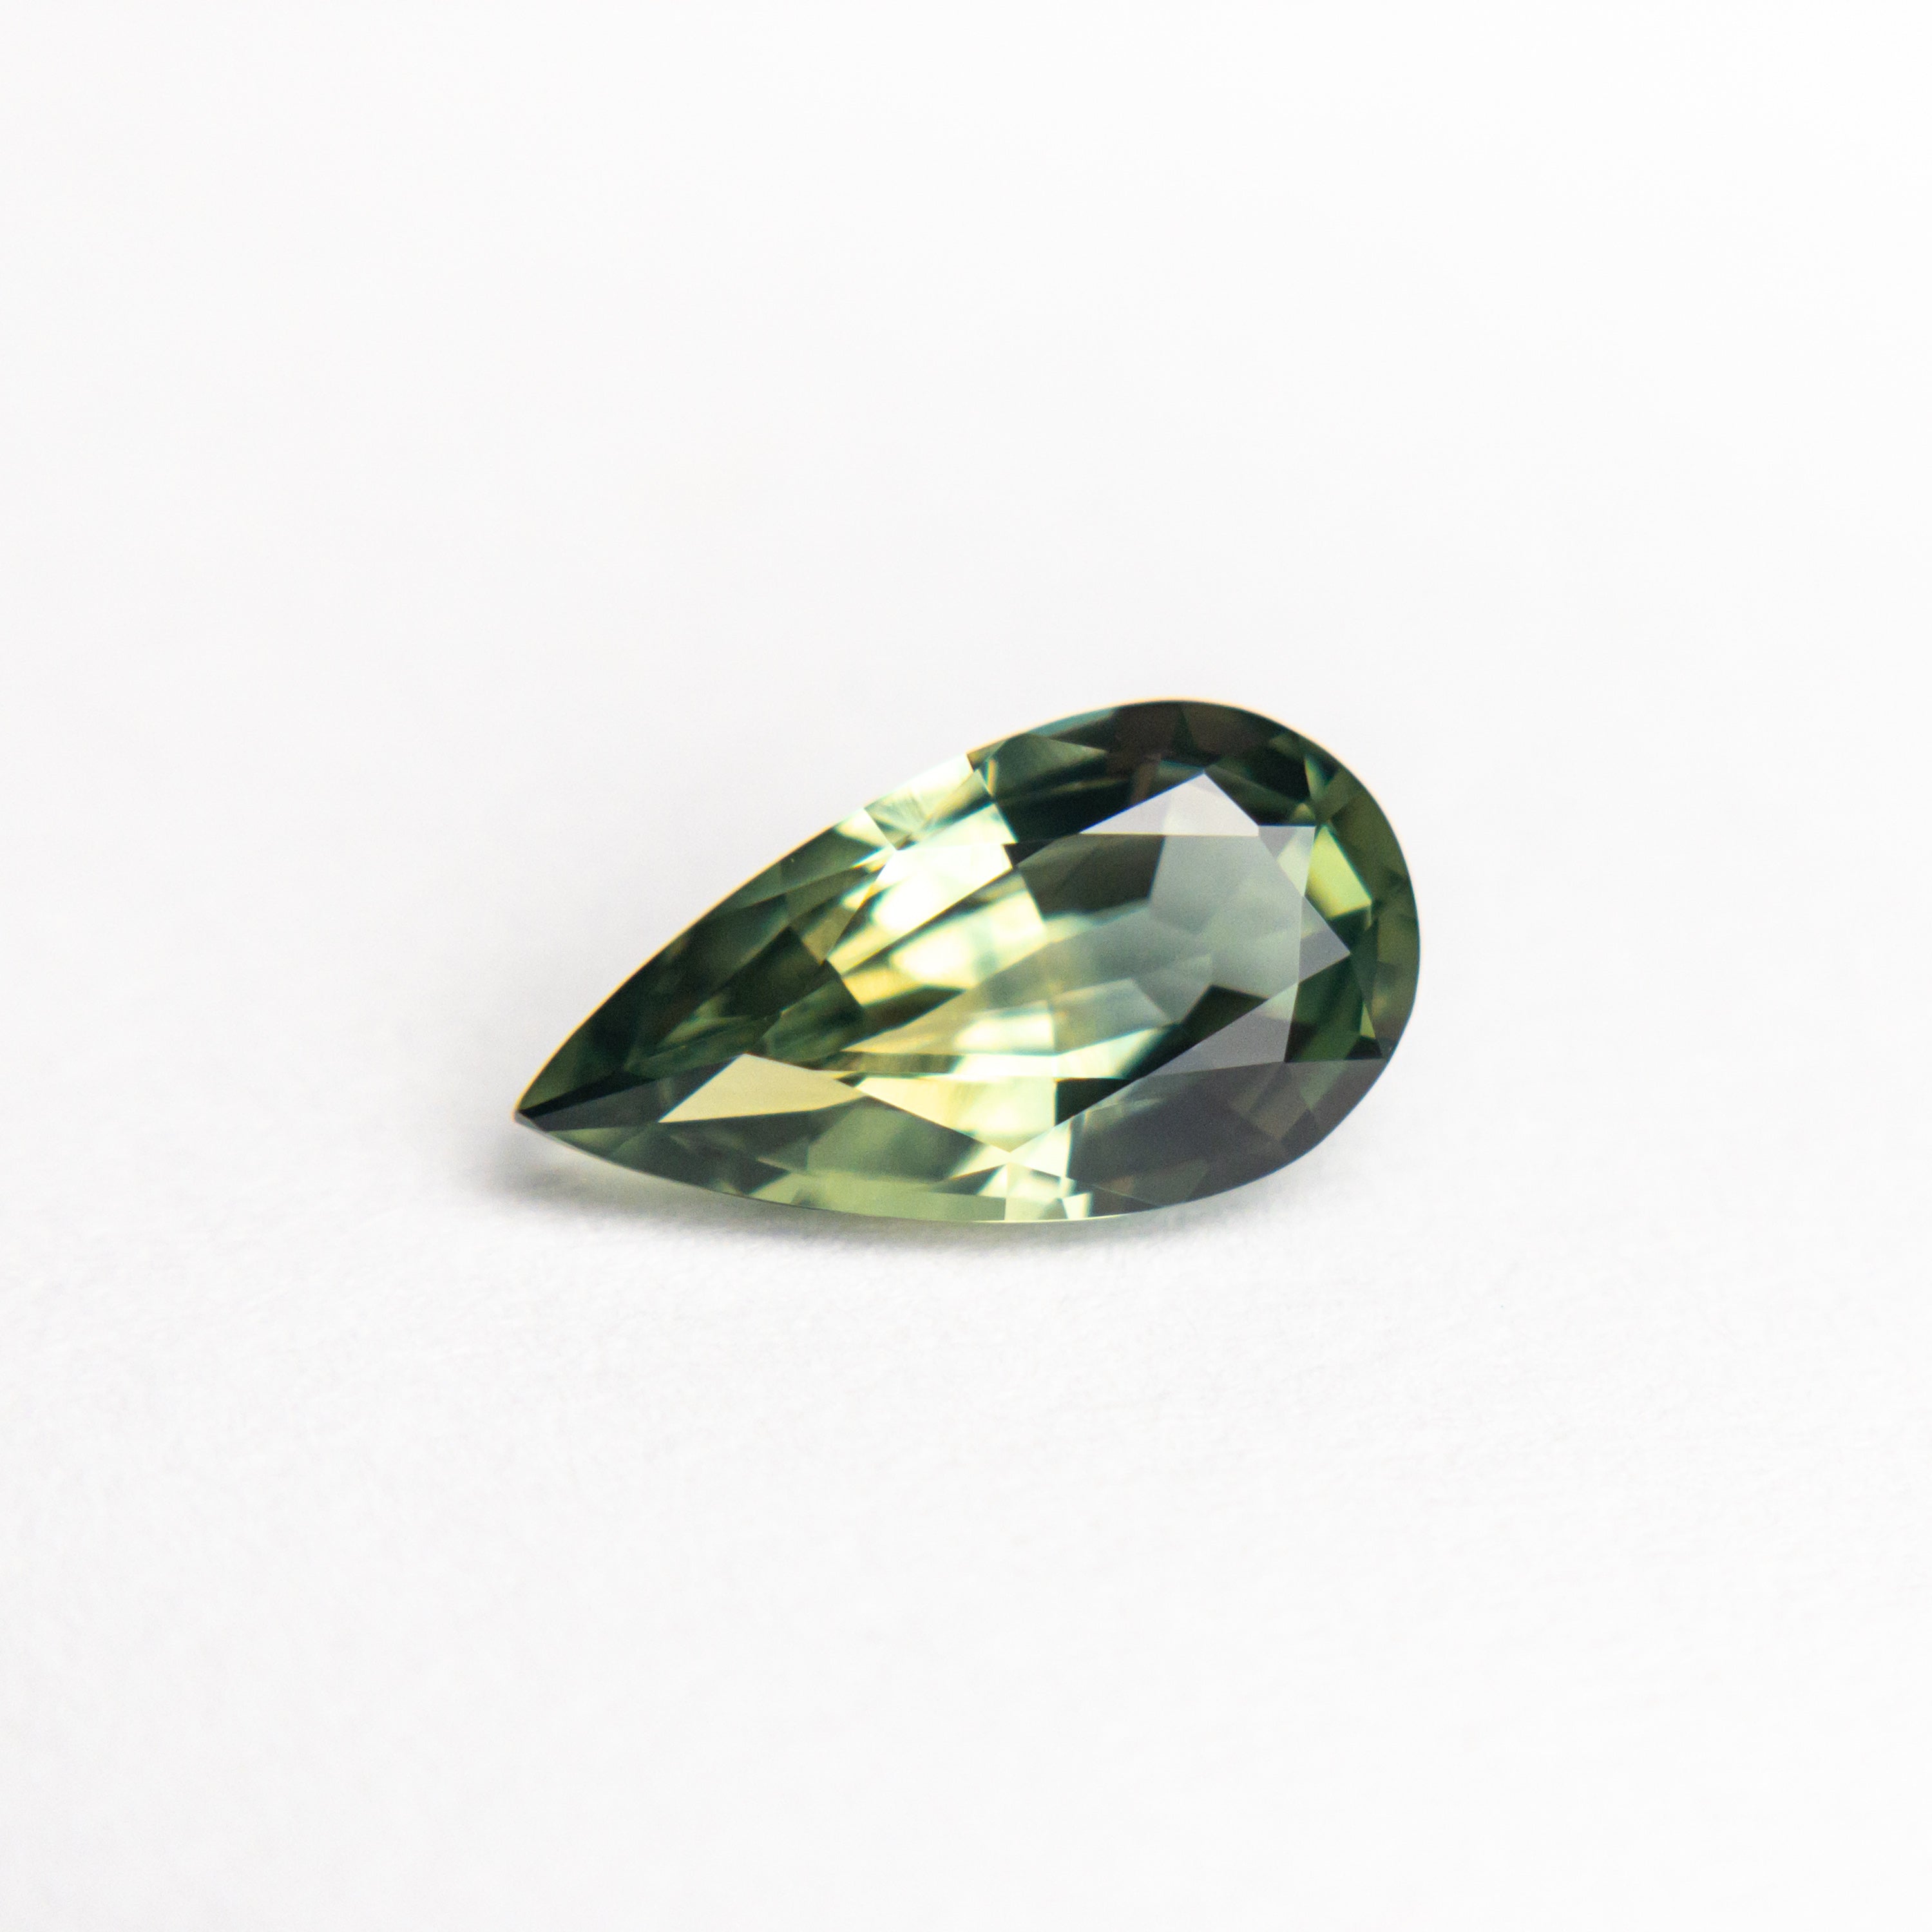 12th HOUSE loose gemstone 0.86ct Teal green pear sapphire